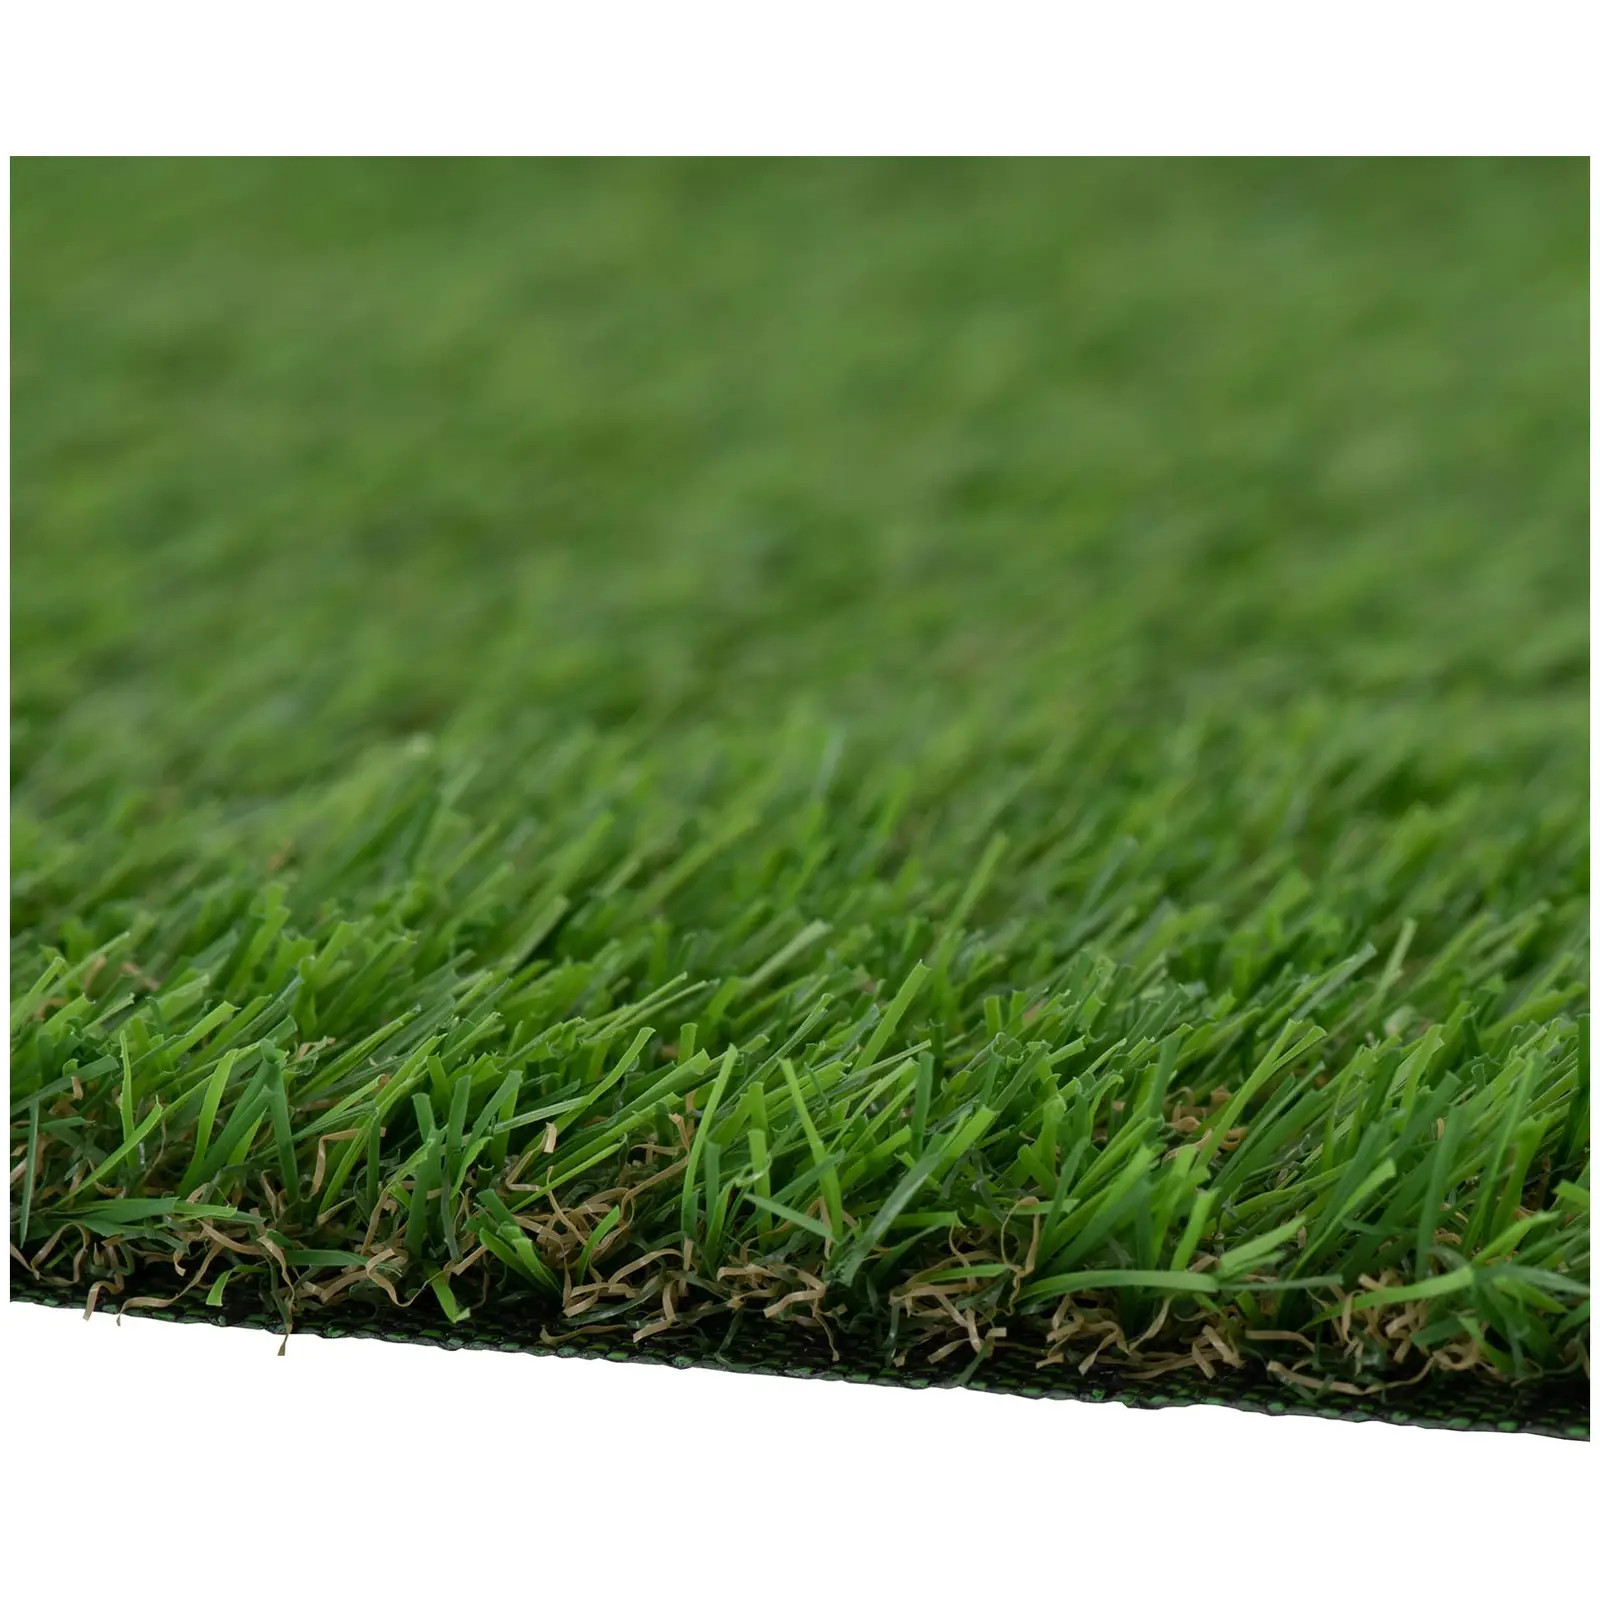 Artificial grass - 200 x 2500 cm - Height: 20 mm - Stitch rate: 13/10 cm - UV-resistant